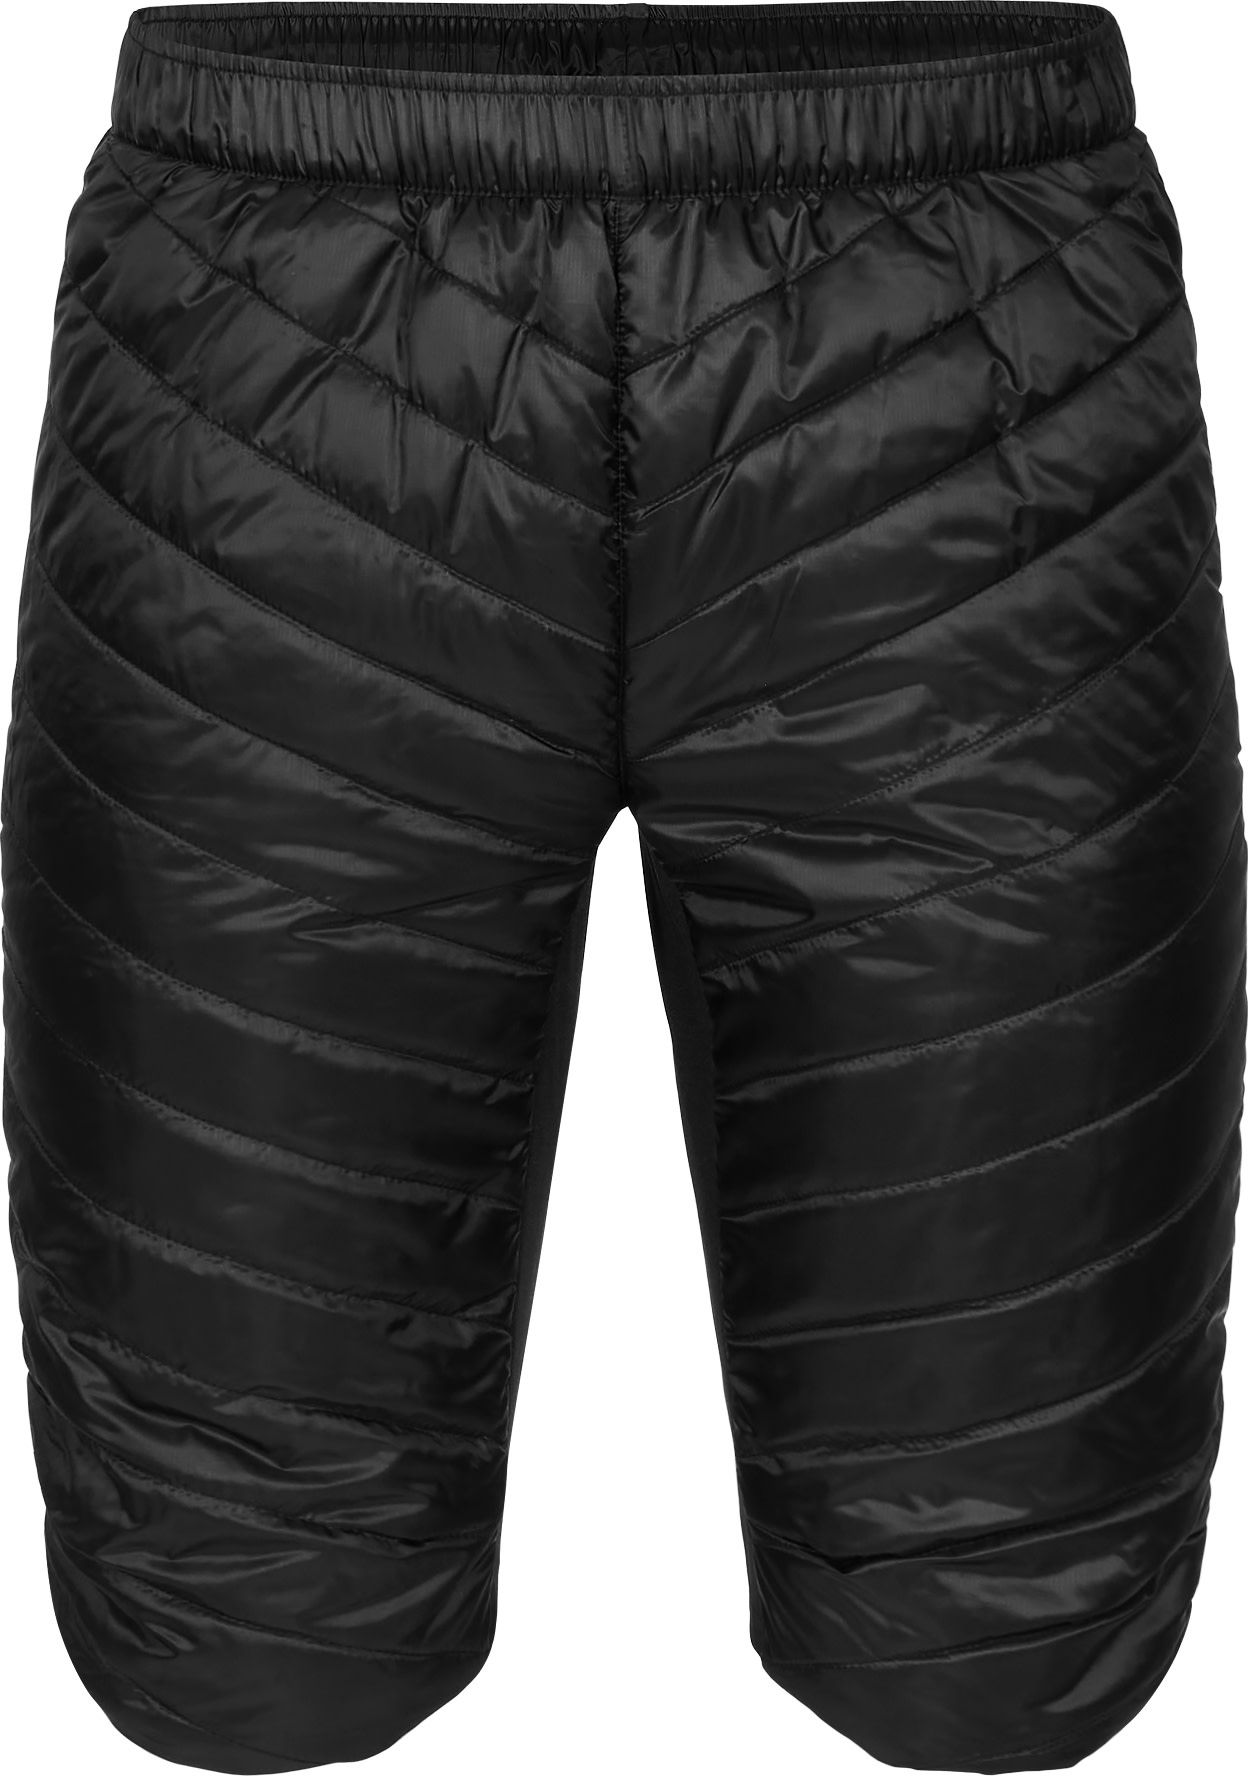 Men\'s Stretch Padded Outnorth | Short Padded here Black Buy Over Men\'s | beauty Black beauty Short Stretch Over